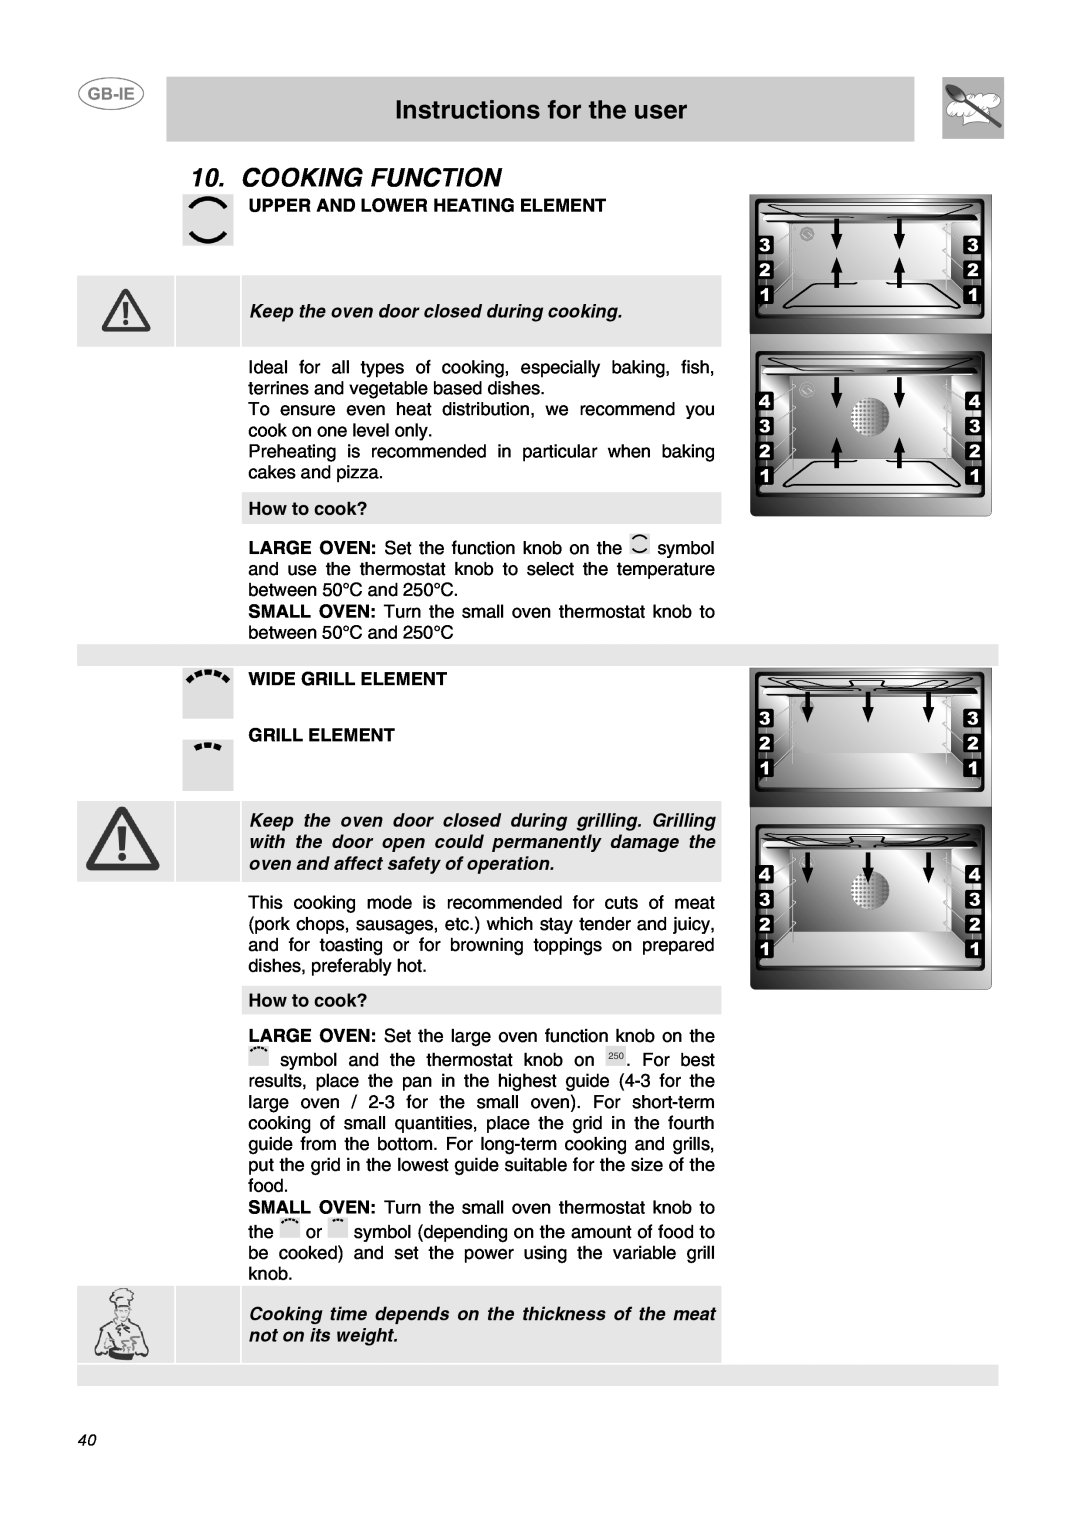 Smeg DO10PSS-5 manual Cooking Function, Instructions for the user, Upper And Lower Heating Element, How to cook? 